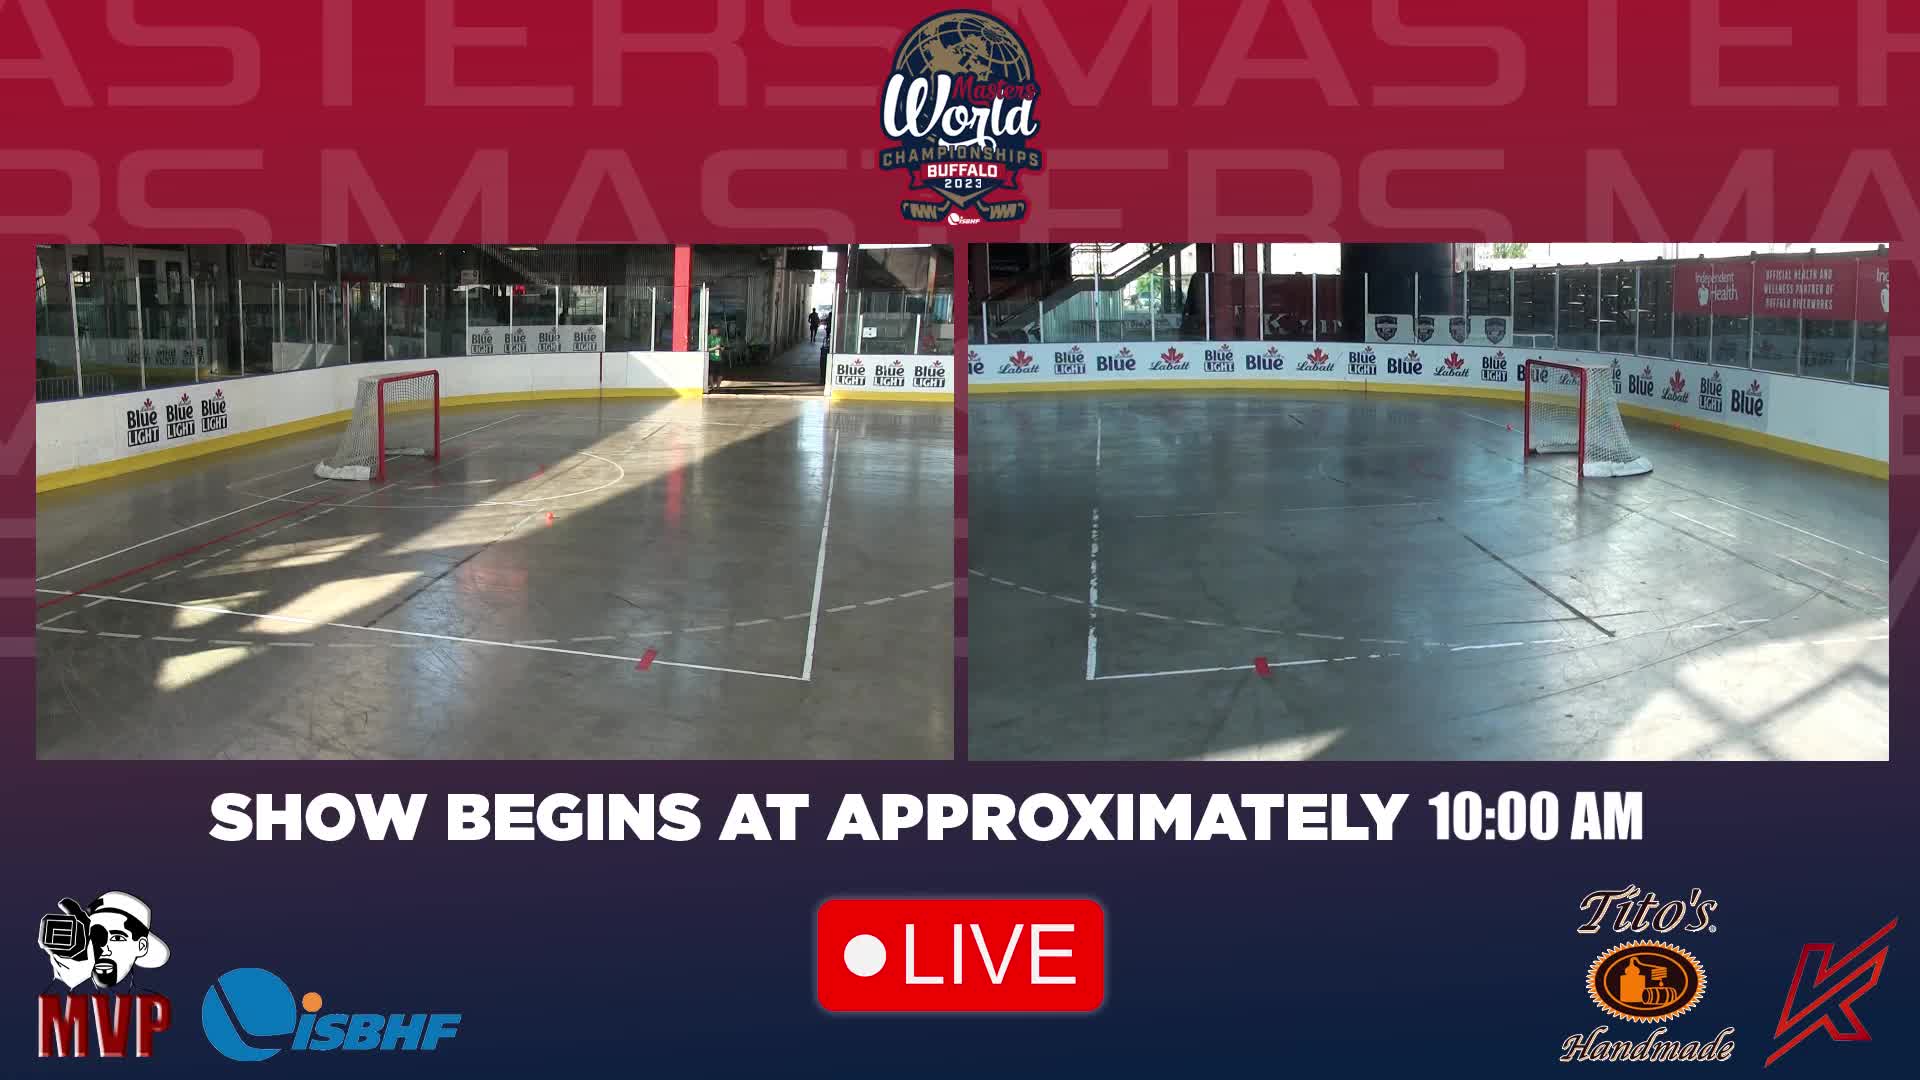 USA Ball Hockey Live coverage of the Masters World Championships Live Stream, Scores, Schedule